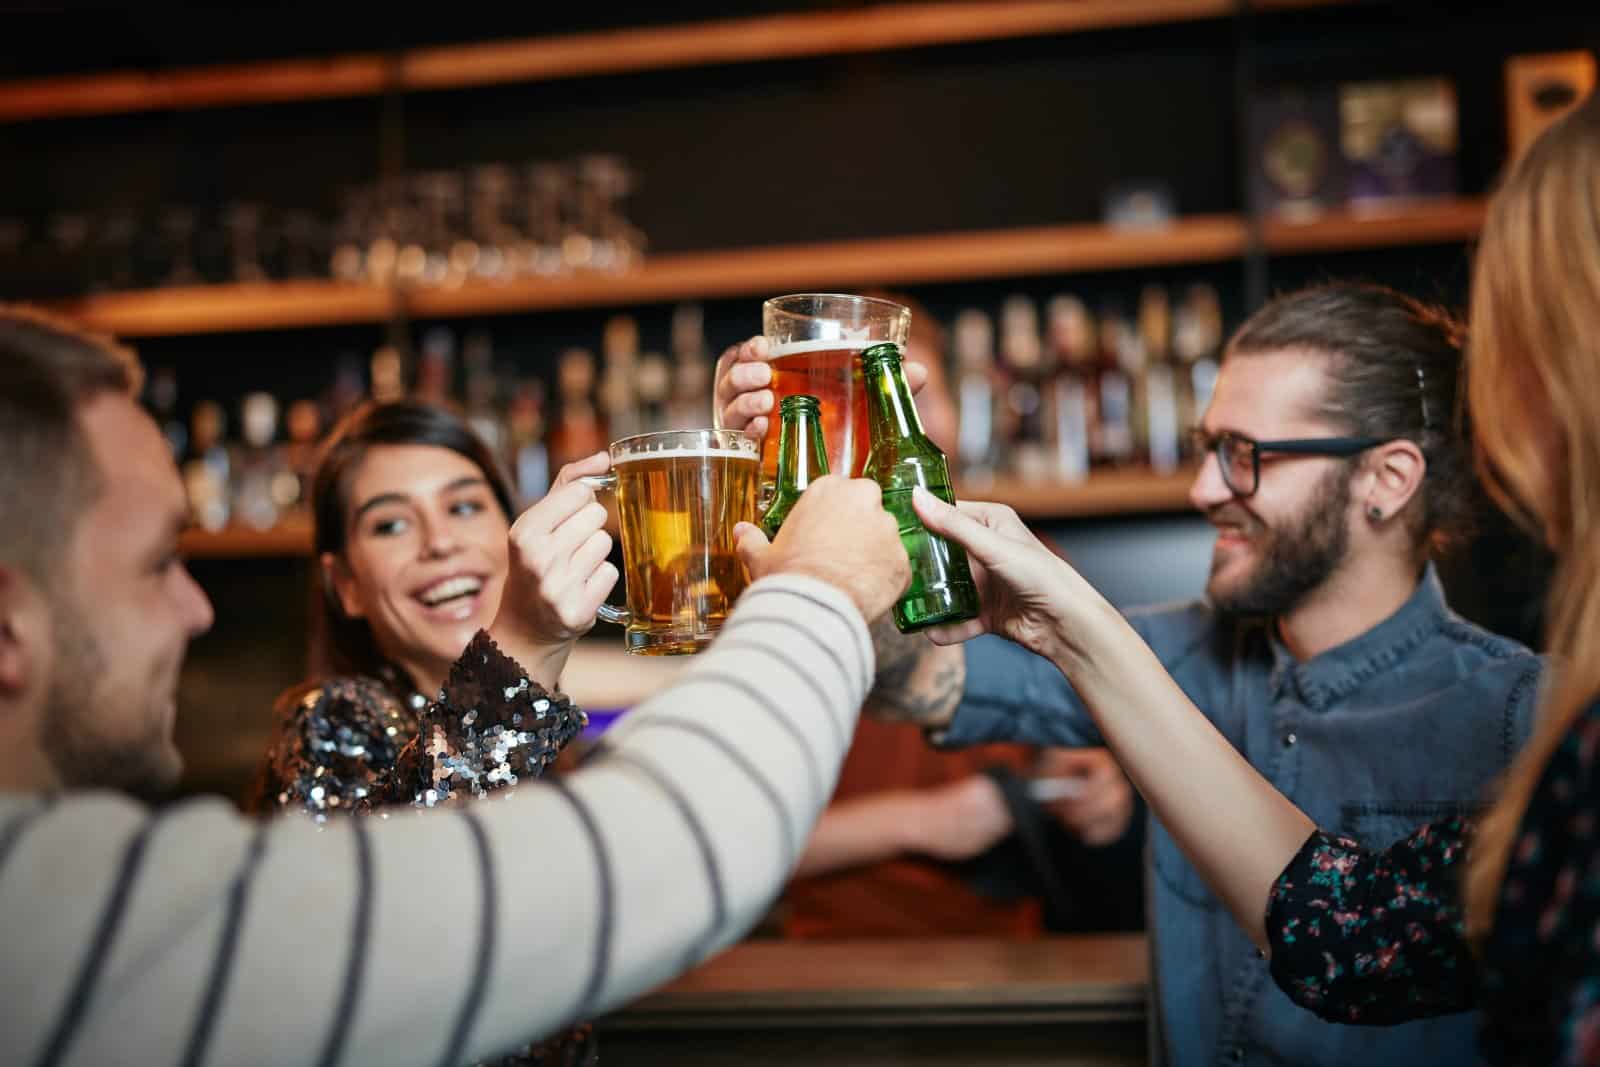 <p class="wp-caption-text">Image Credit: Shutterstock / Milan Ilic Photographer</p>  <p><span>The Dublin Literary Pub Crawl is a unique experience that combines the city’s rich literary heritage with its famous pub culture. Led by actors and scholars, the crawl takes participants through historic pubs associated with Dublin’s literary greats, including James Joyce, Samuel Beckett, and Oscar Wilde. It’s an entertaining and informative way to explore the city, offering insights into the writers’ lives and the pubs that inspired them.</span></p>